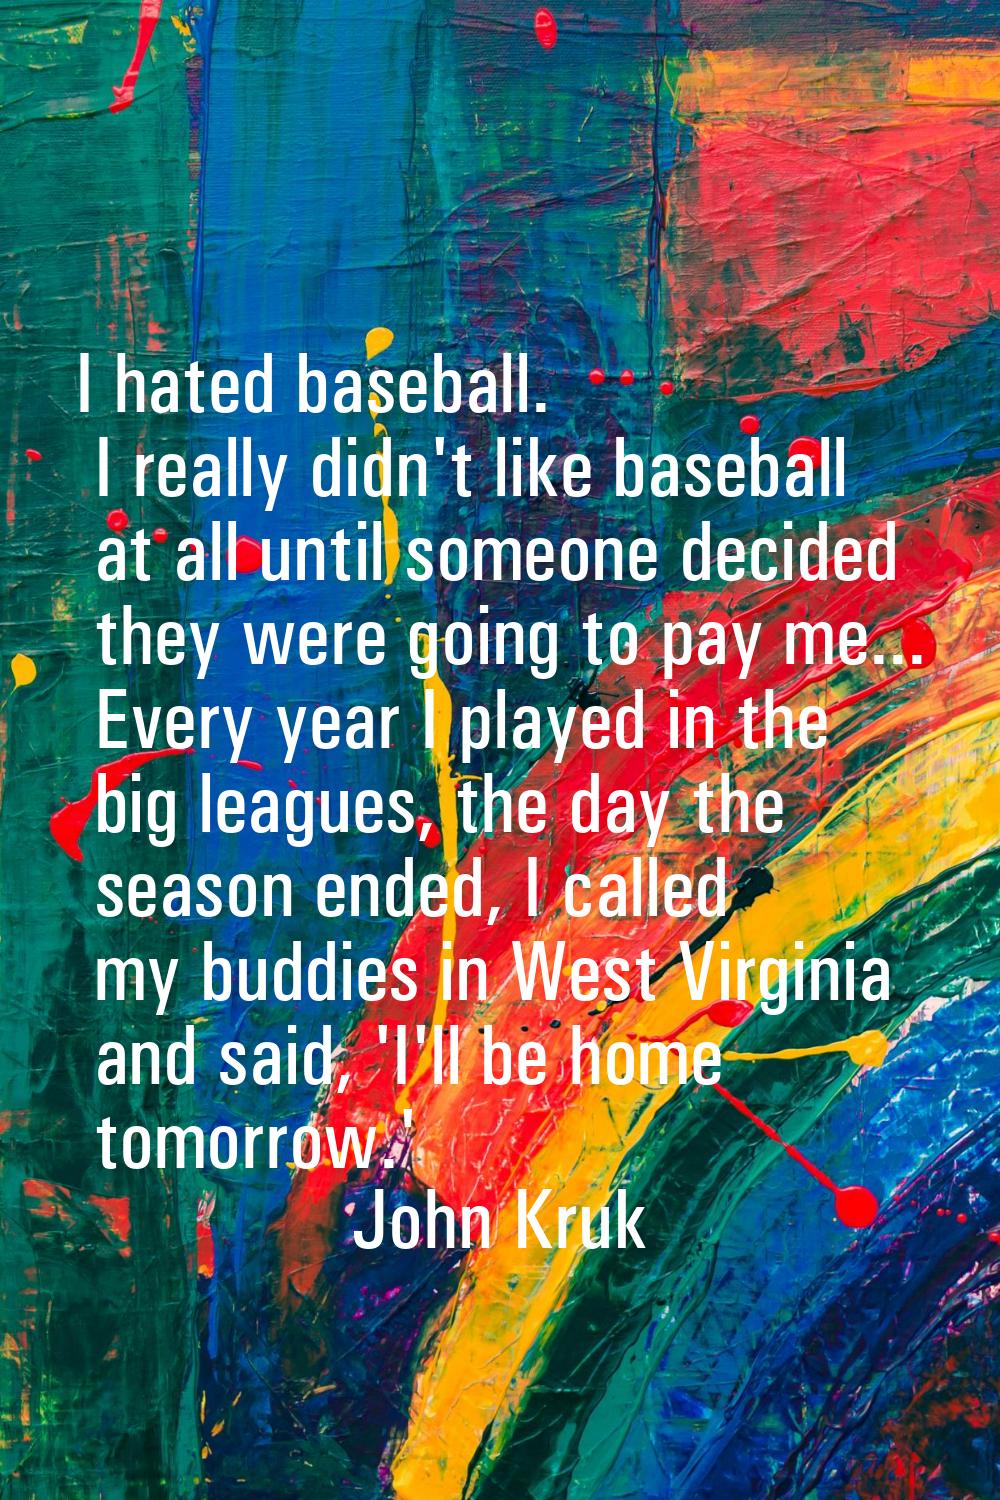 I hated baseball. I really didn't like baseball at all until someone decided they were going to pay